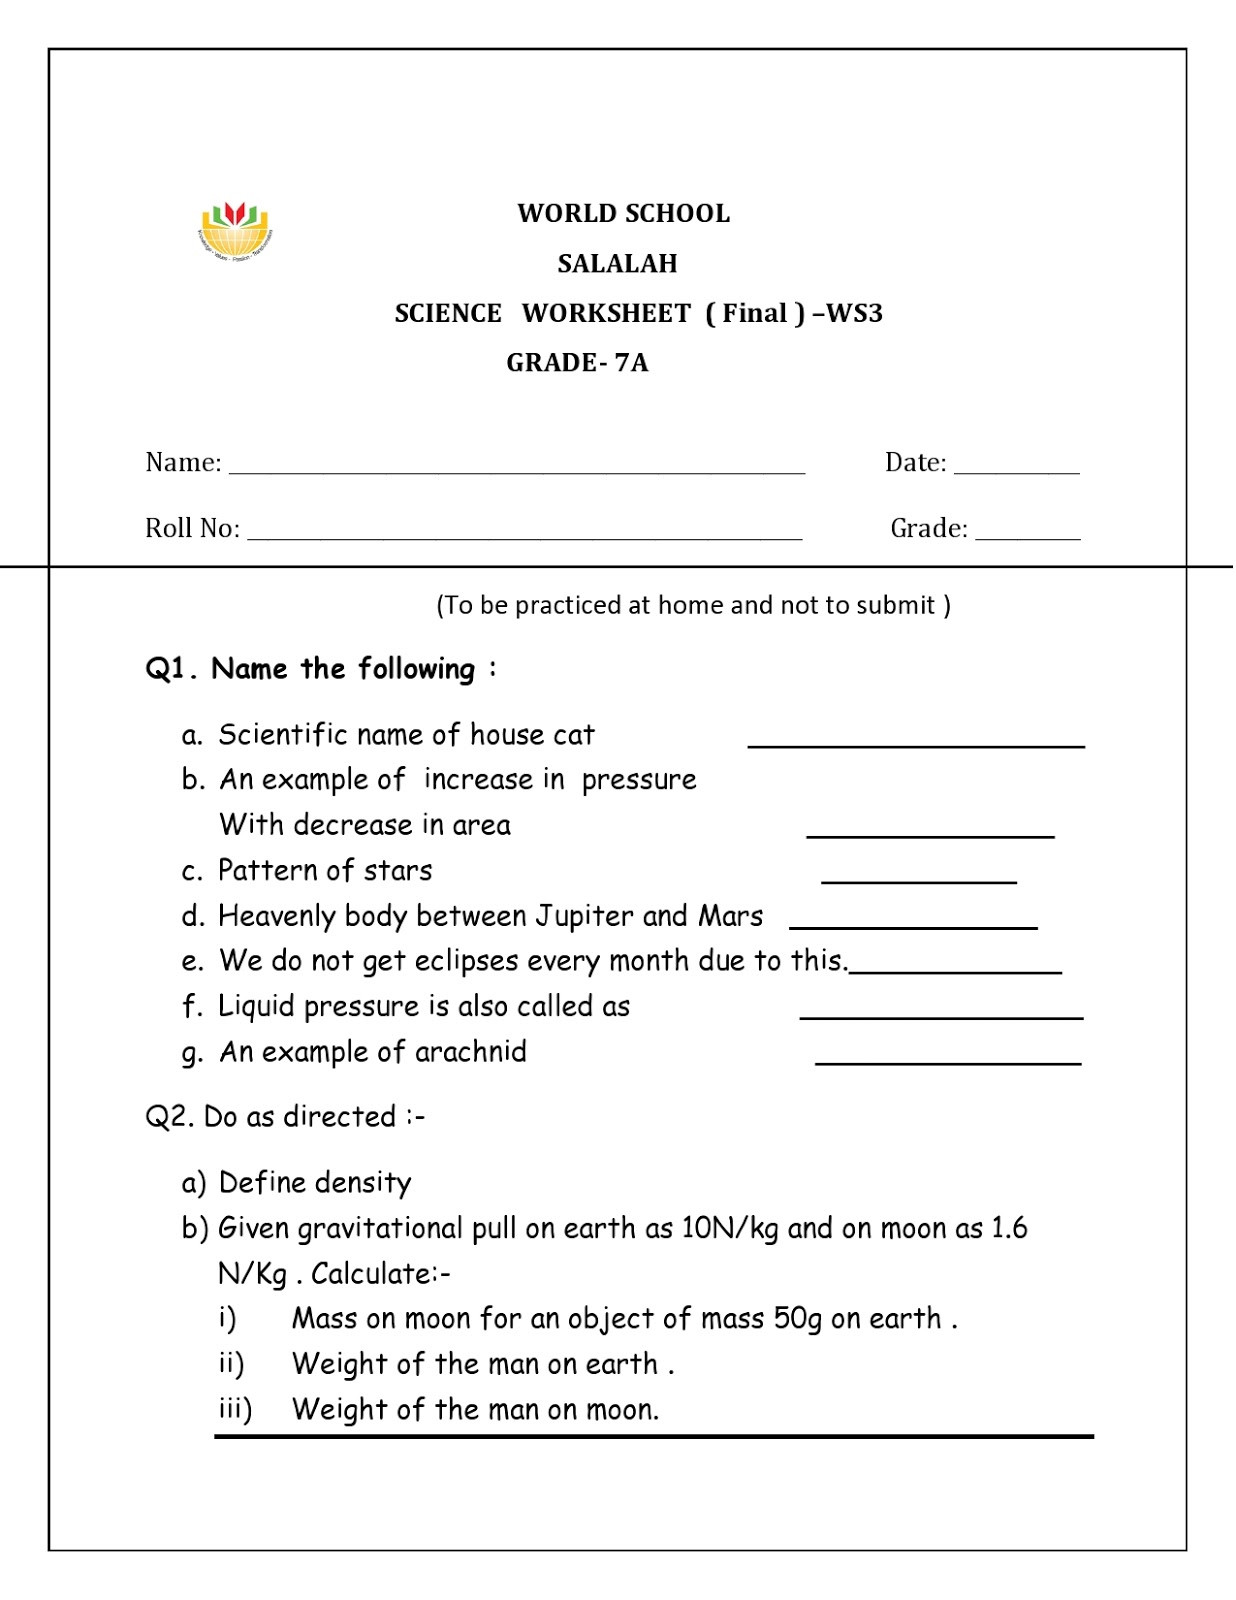 Density Calculations Worksheet 1 Monthly Archives July 2020 Page 231 Paycheck Worksheets for